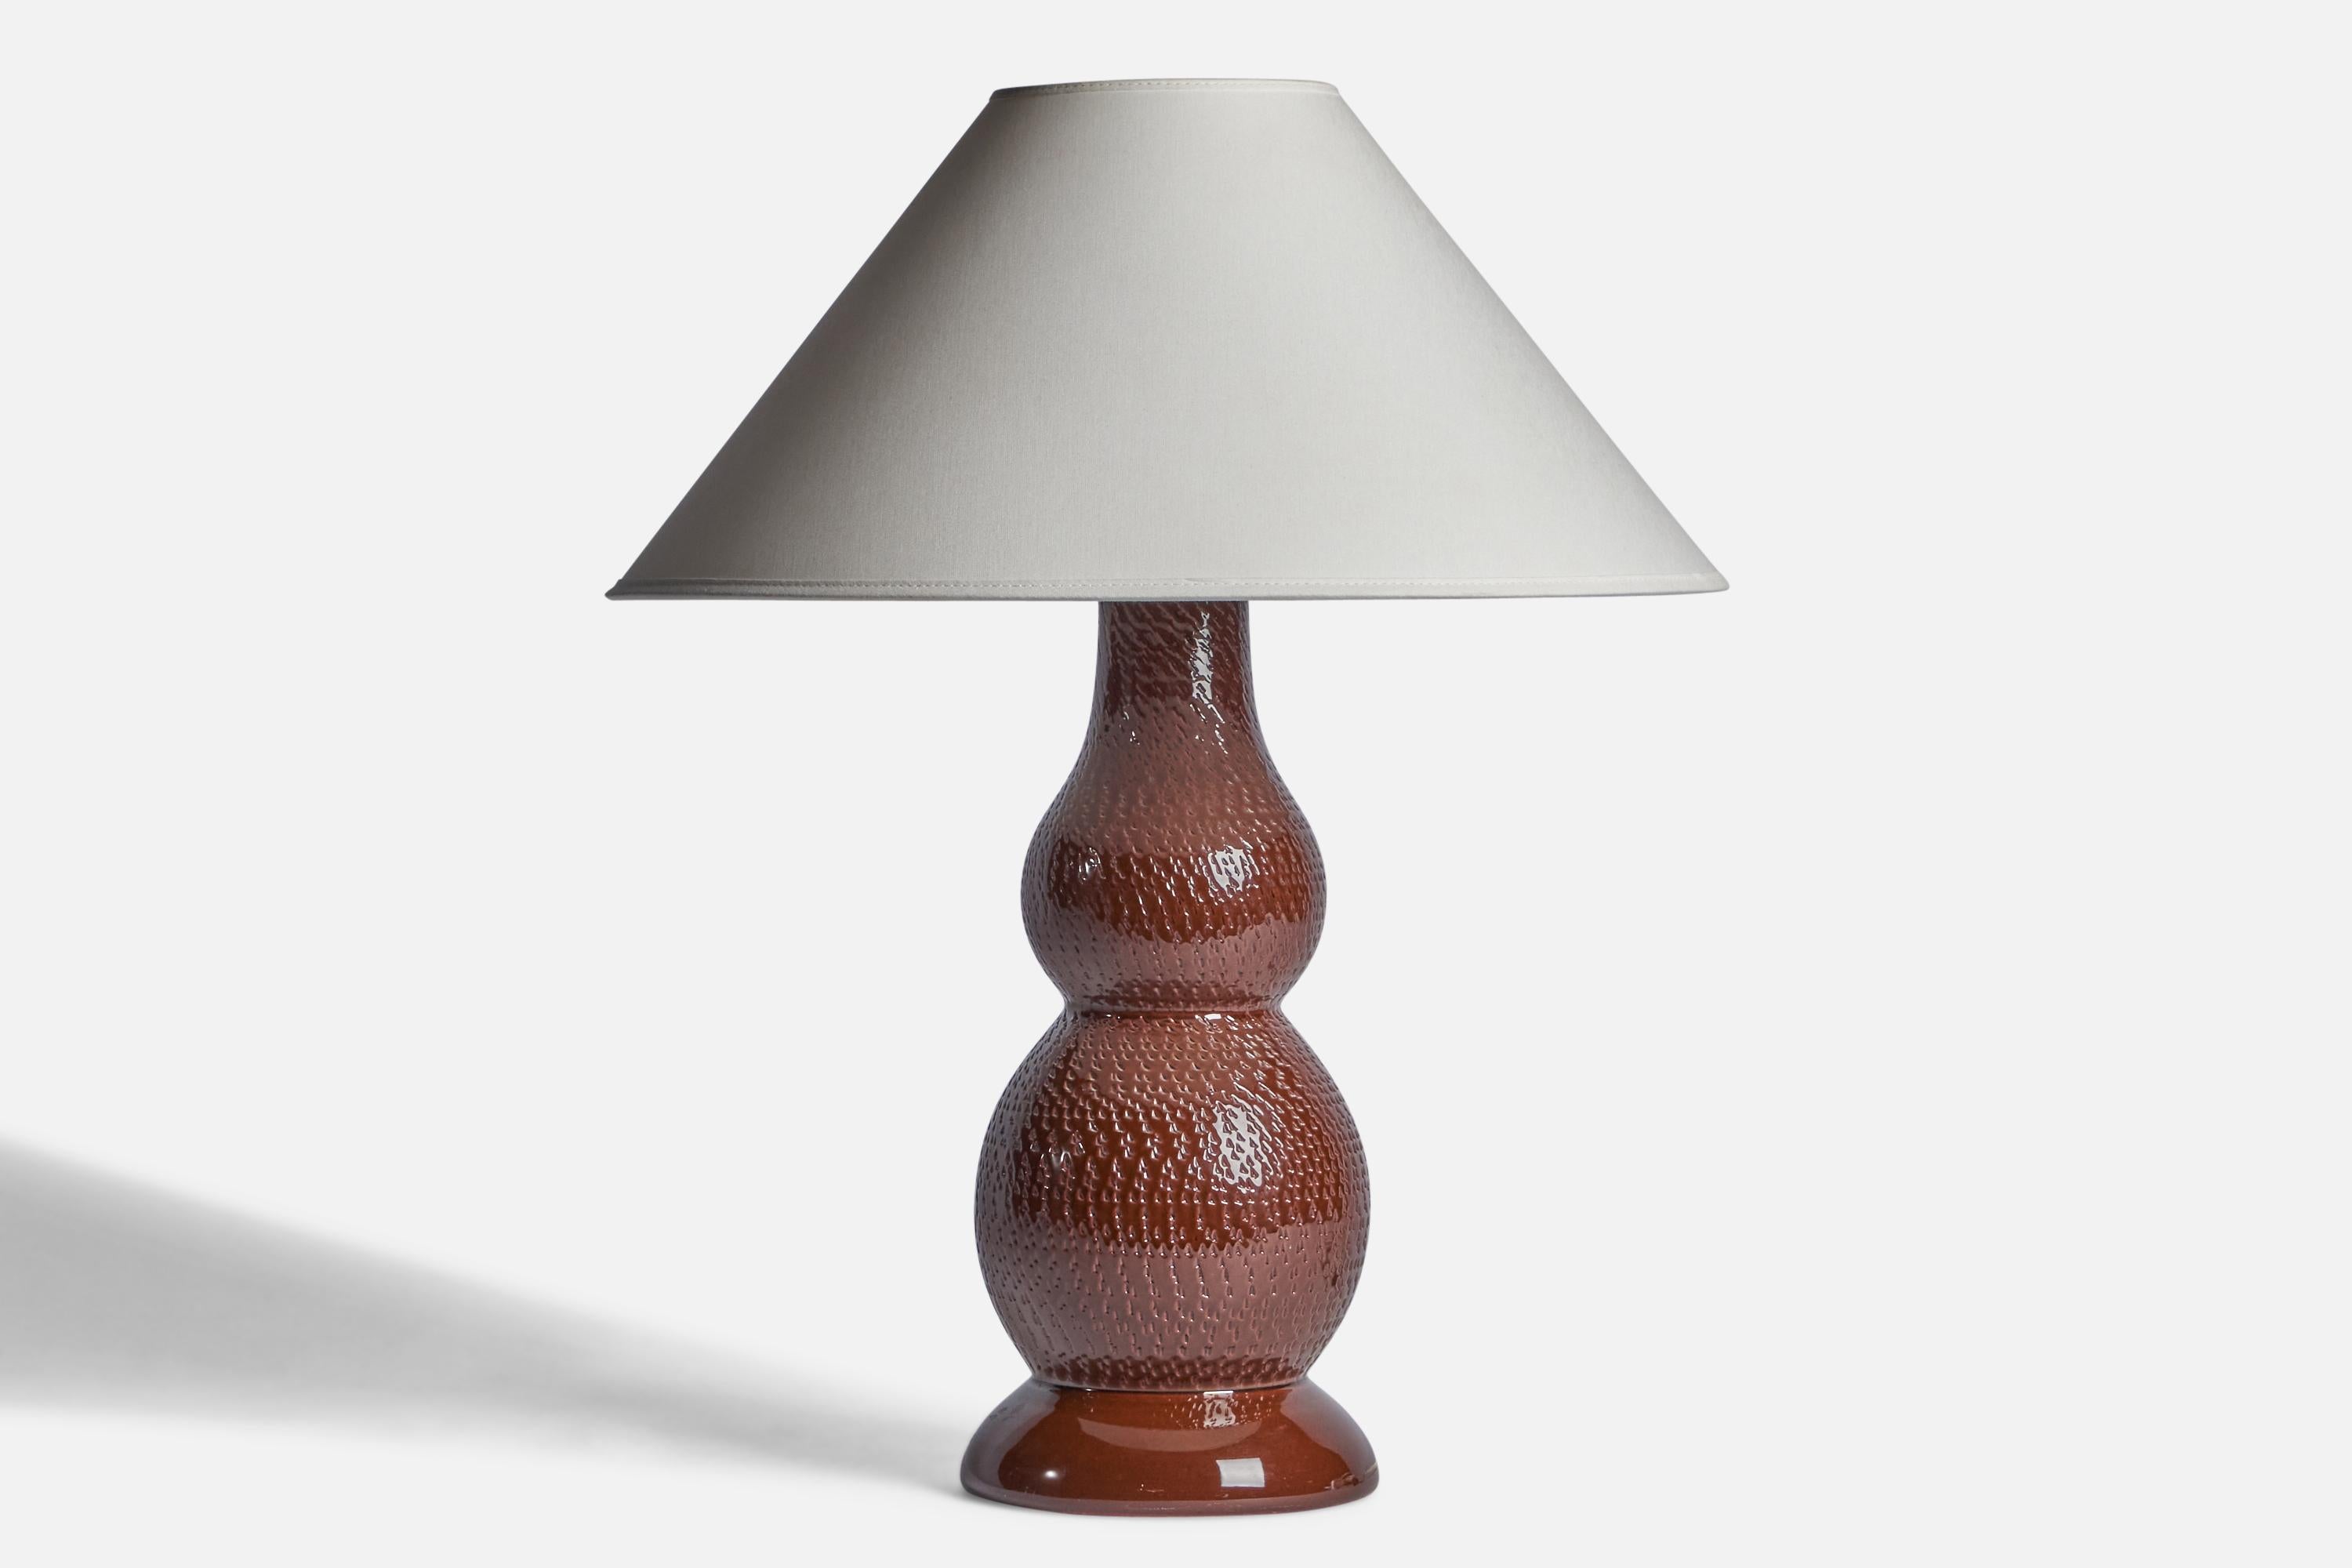 A brown-glazed incised stoneware table lamp designed by Mats Birgersson and produced by Töreboda Keramik, Sweden, c. 1960s.

Dimensions of Lamp (inches): 15.75” H x 5.75” Diameter
Dimensions of Shade (inches): 4.5” Top Diameter x 16” Bottom Diameter